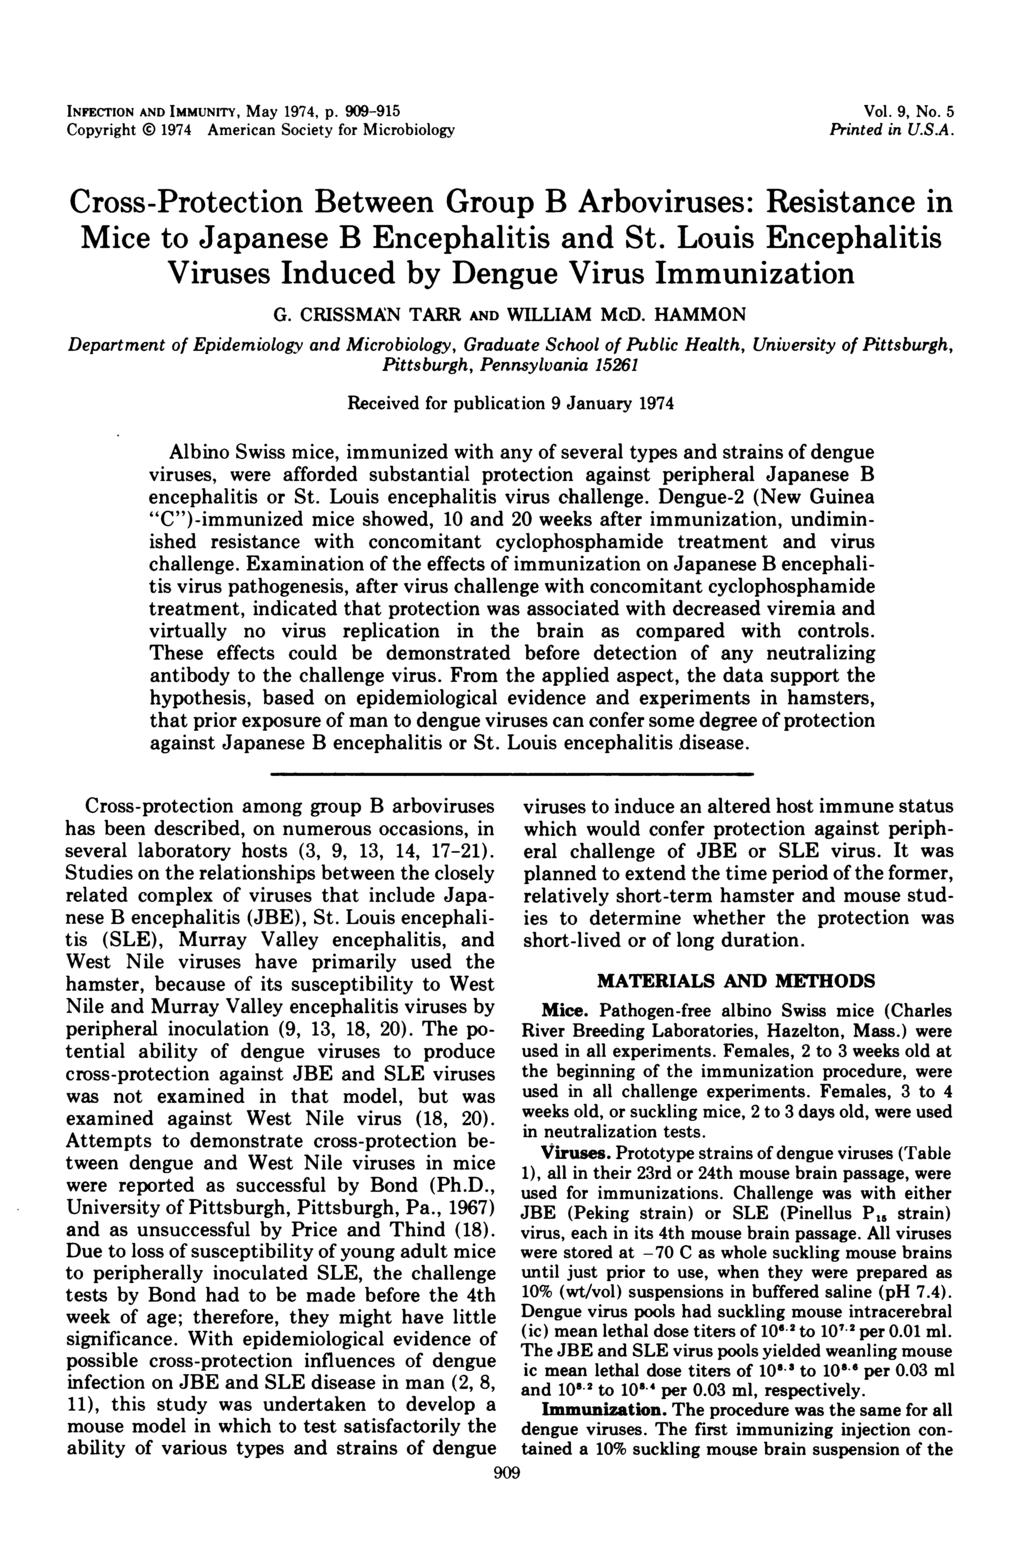 INFECrlON AND IMMUNITY, May 1974, p. 909-915 Copyright 0 1974 American Society for Microbiology Vol. 9, No. 5 Printed in U.S.A. Cross-Protection Between Group B Arboviruses: Resistance in Mice to Japanese B Encephalitis and St.